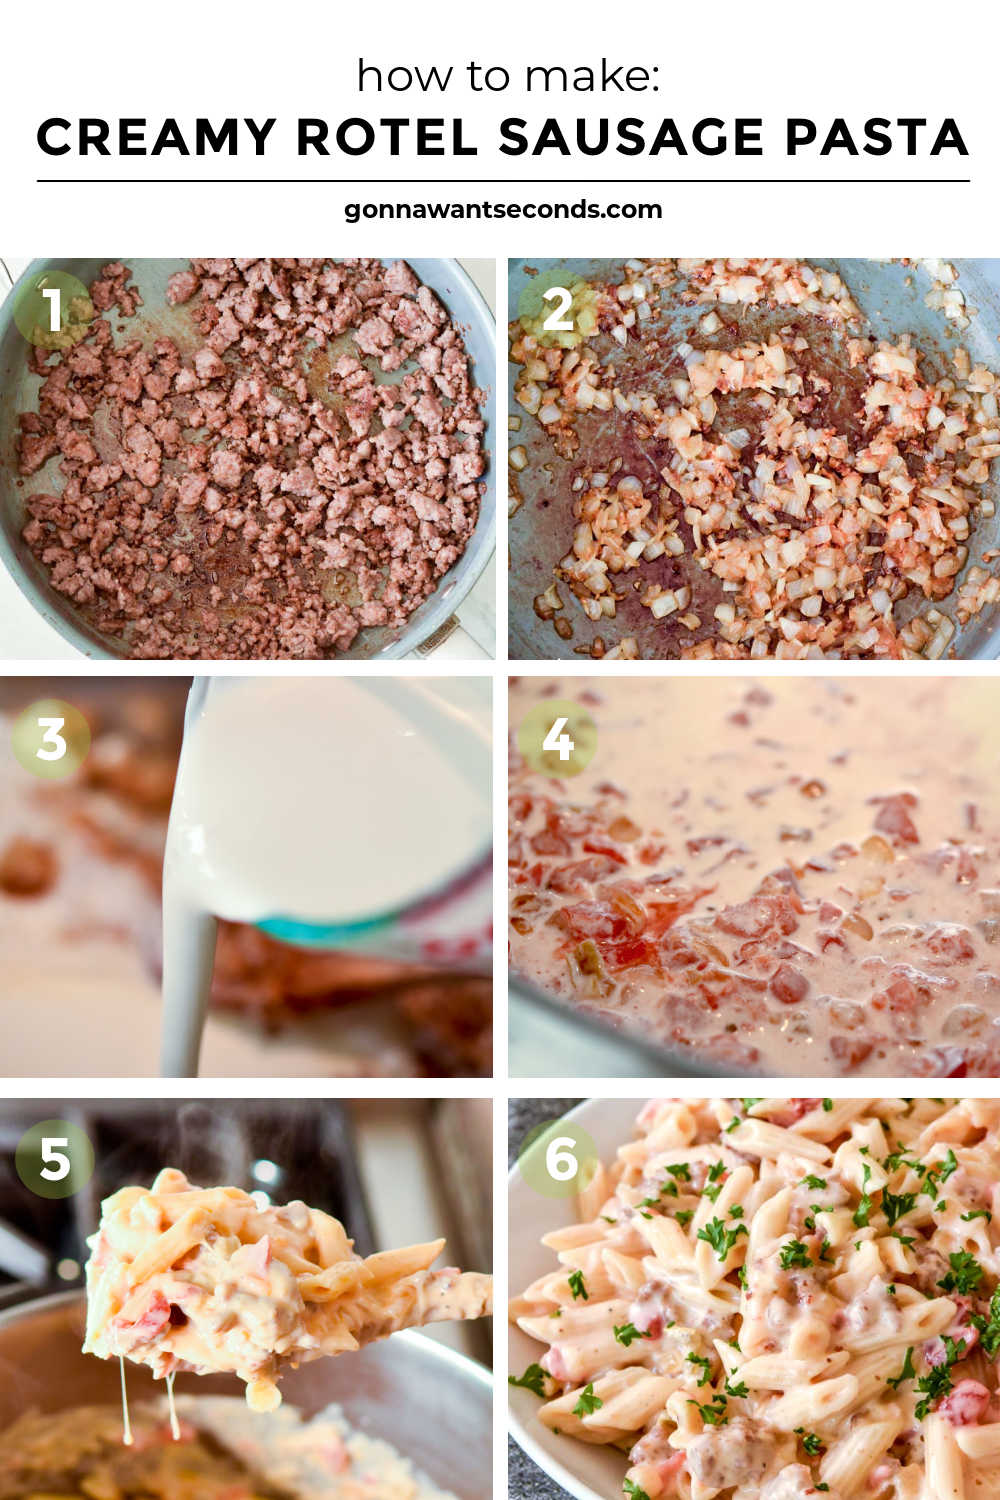 Step by step how to make creamy rotel sausage pasta